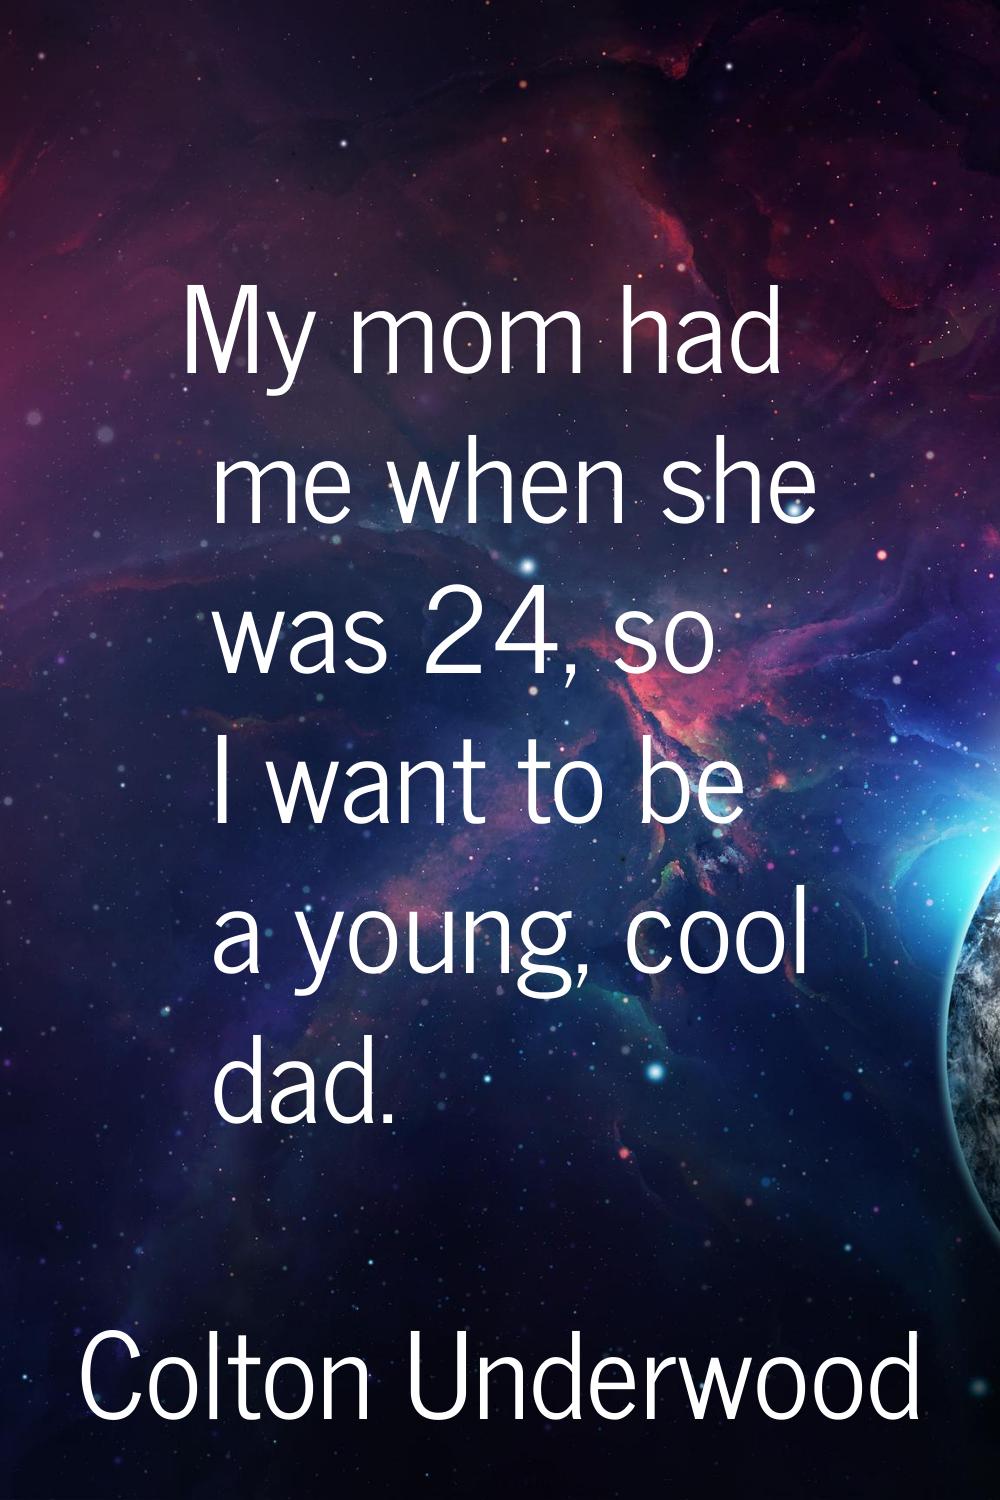 My mom had me when she was 24, so I want to be a young, cool dad.